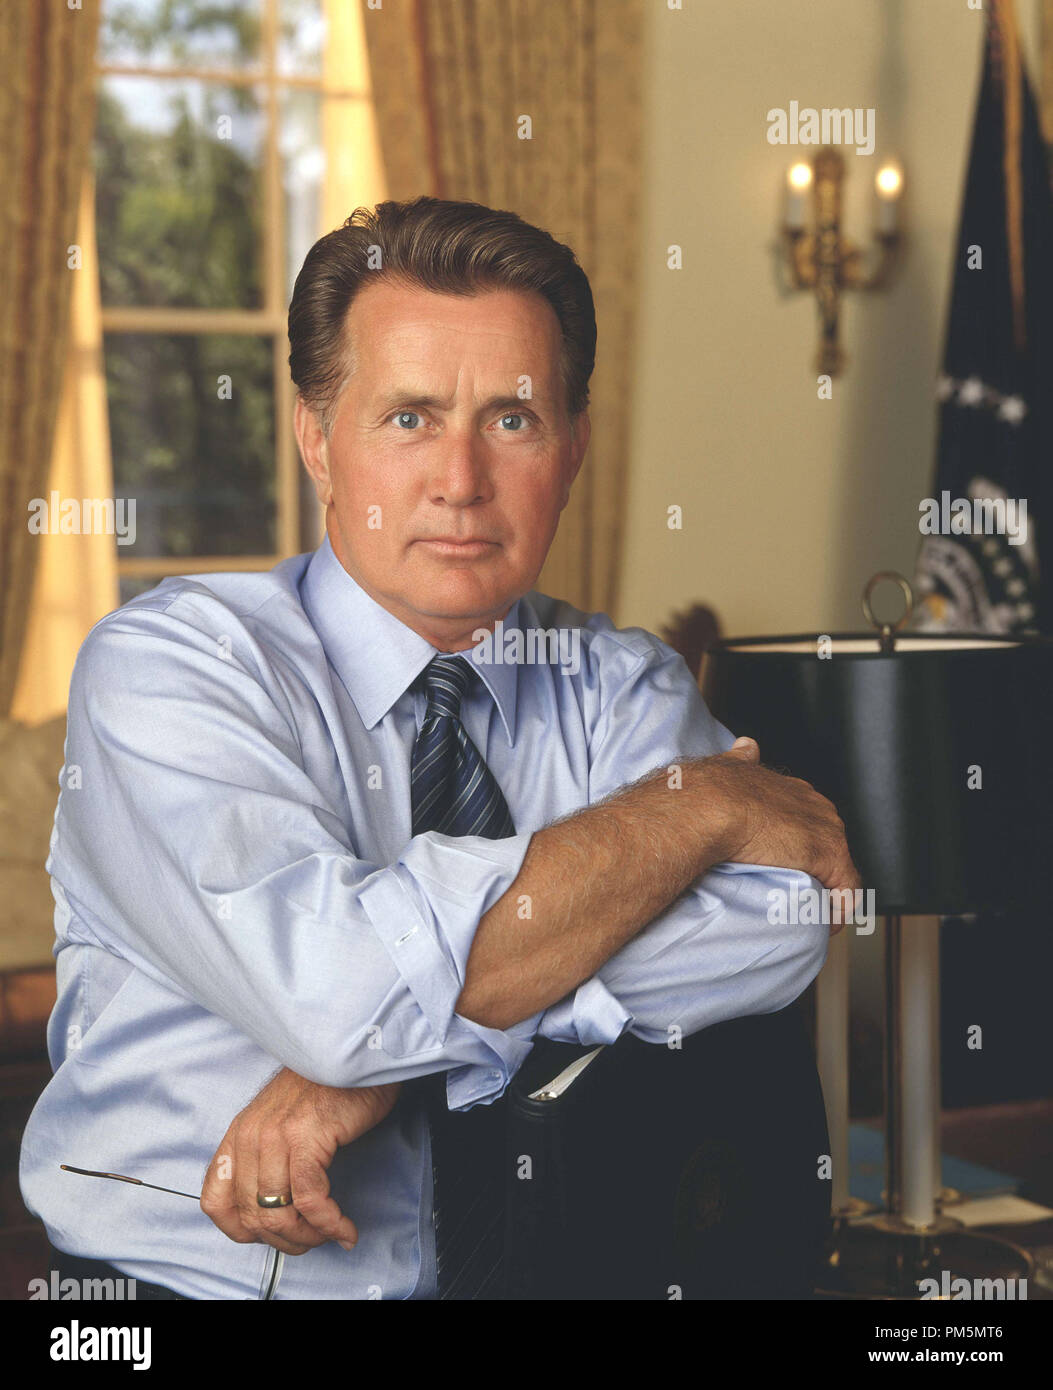 Film Still / Publicity Still from 'The West Wing' Martin Sheen circa 2001 Photo credit: David Rose    File Reference # 30847108THA  For Editorial Use Only -  All Rights Reserved Stock Photo